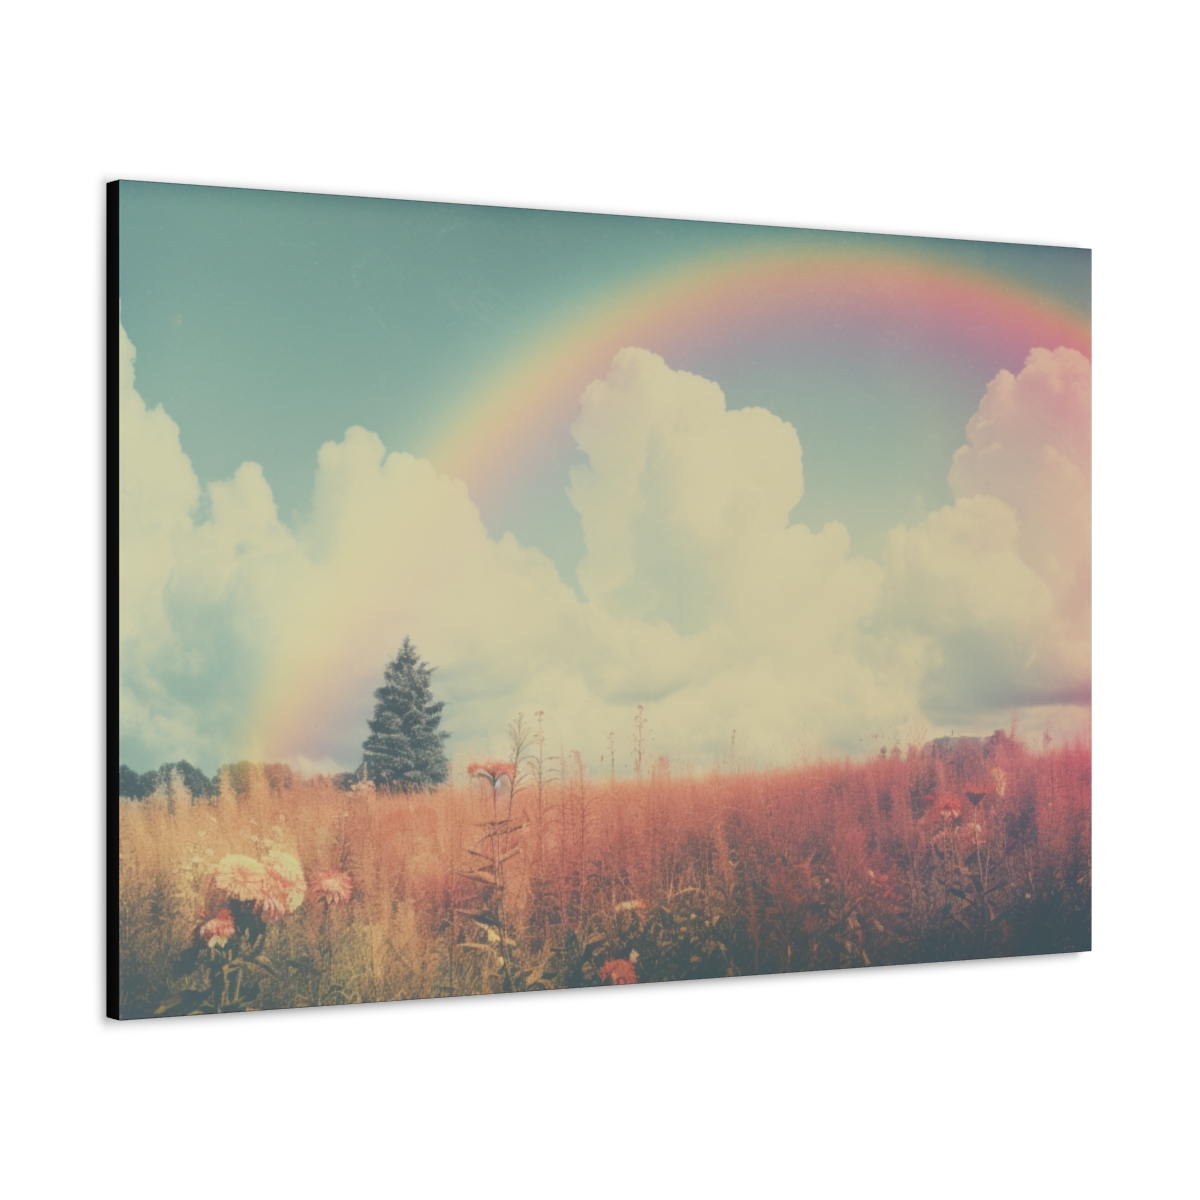 Dreamy Ethereal Rainbow Art: Spectral Reverie